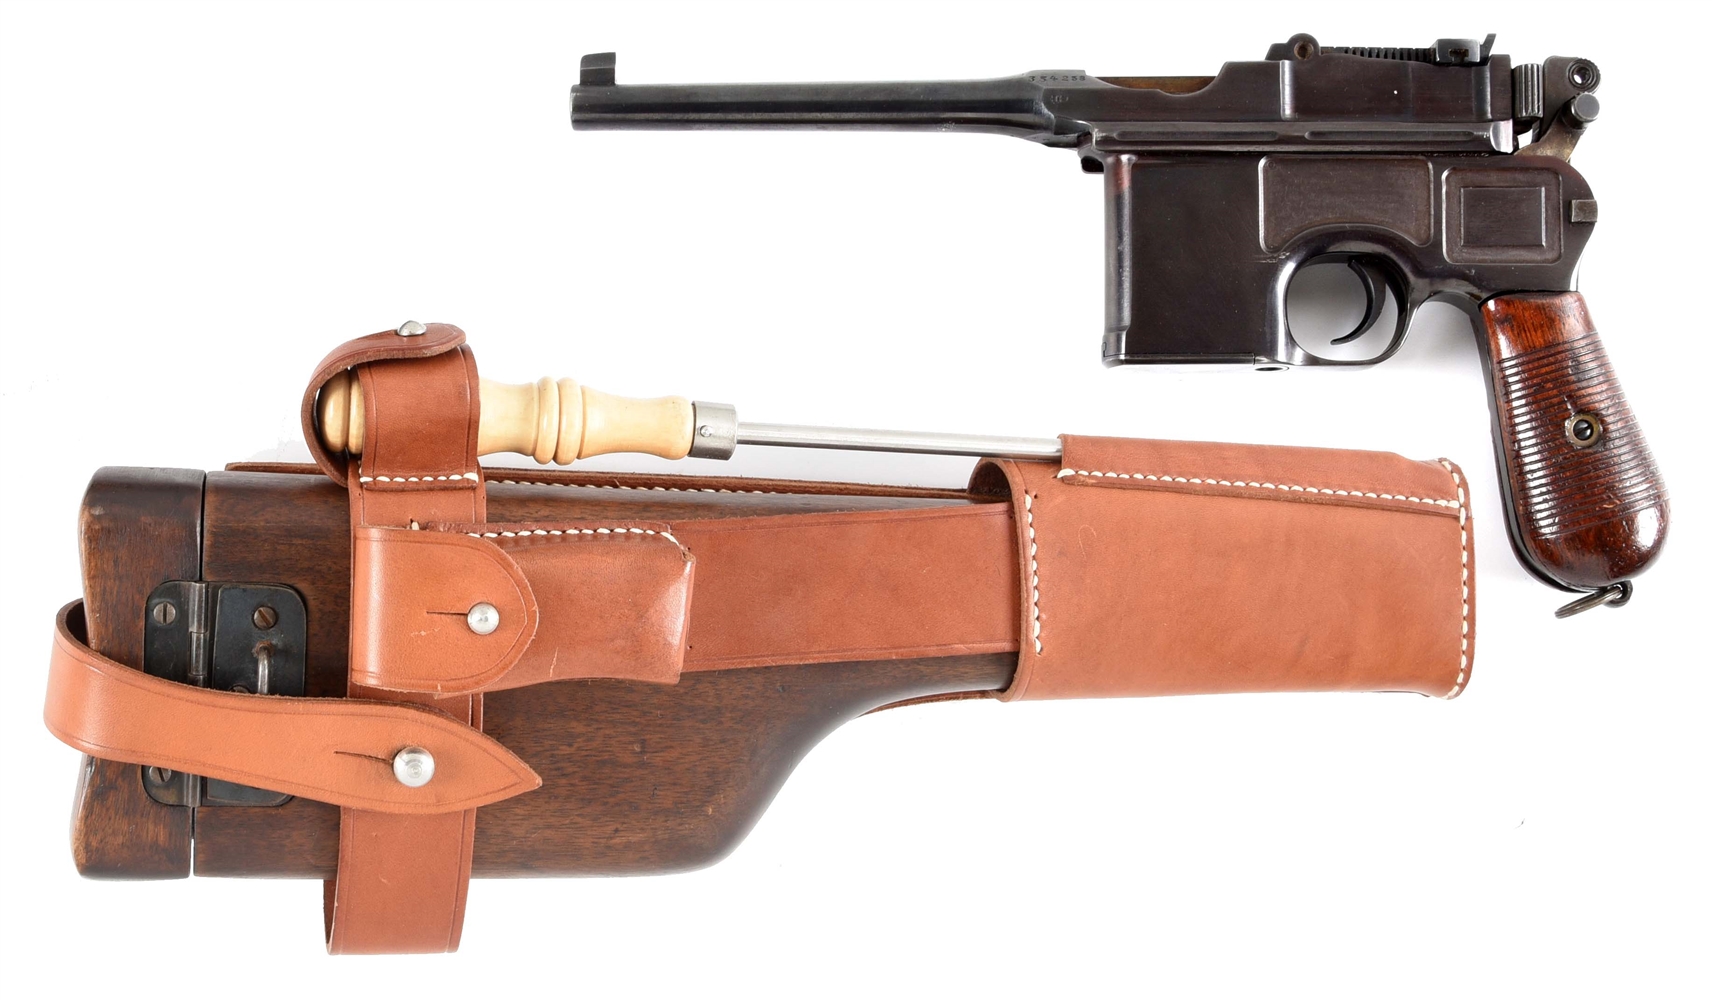 (C) MAUSER C96 SEMI-AUTOMATIC PISTOL WITH SHOULDER STOCK.